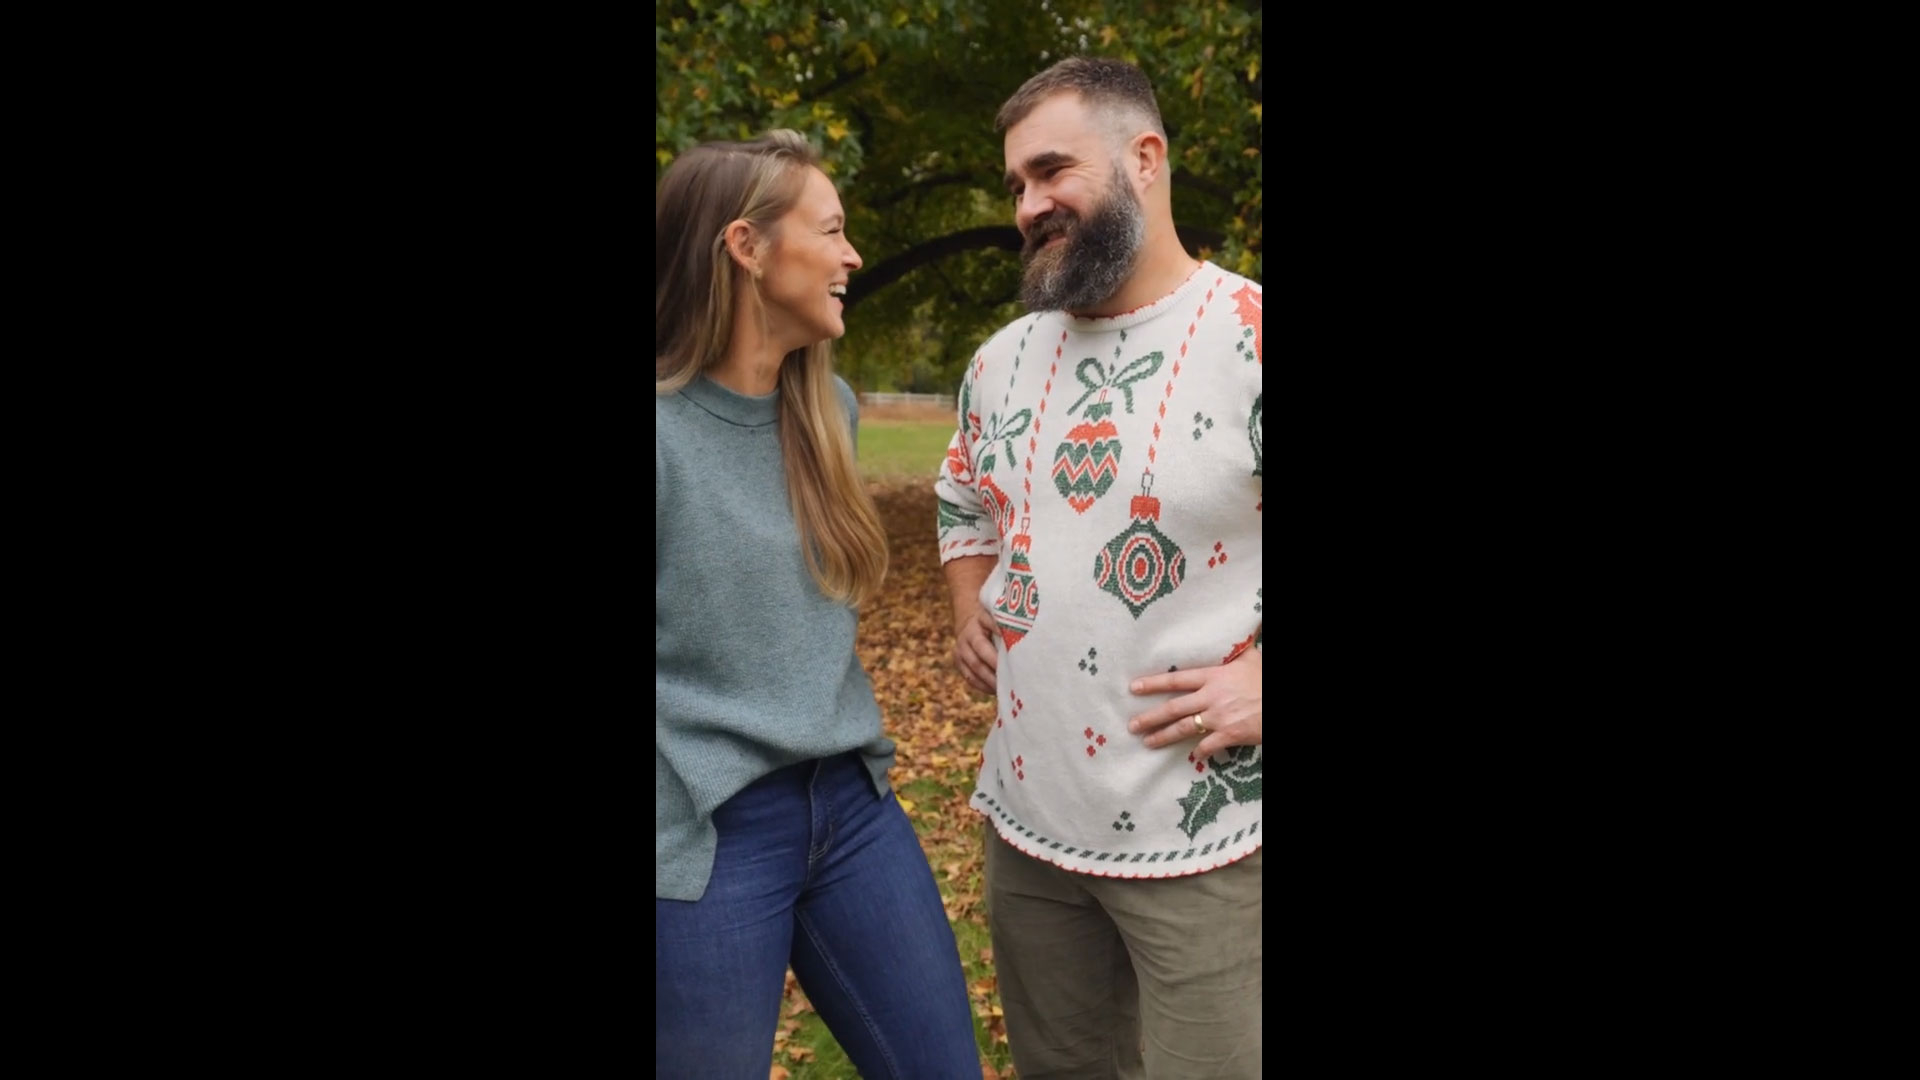 Design marketplace Minted and Jason Kelce’s family of five teamed up for their 2023 holiday card photoshoot. Authentic family moments that celebrate the humor, joy and chaos that is the holiday season were captured play-by-play. Courtesy of Minted